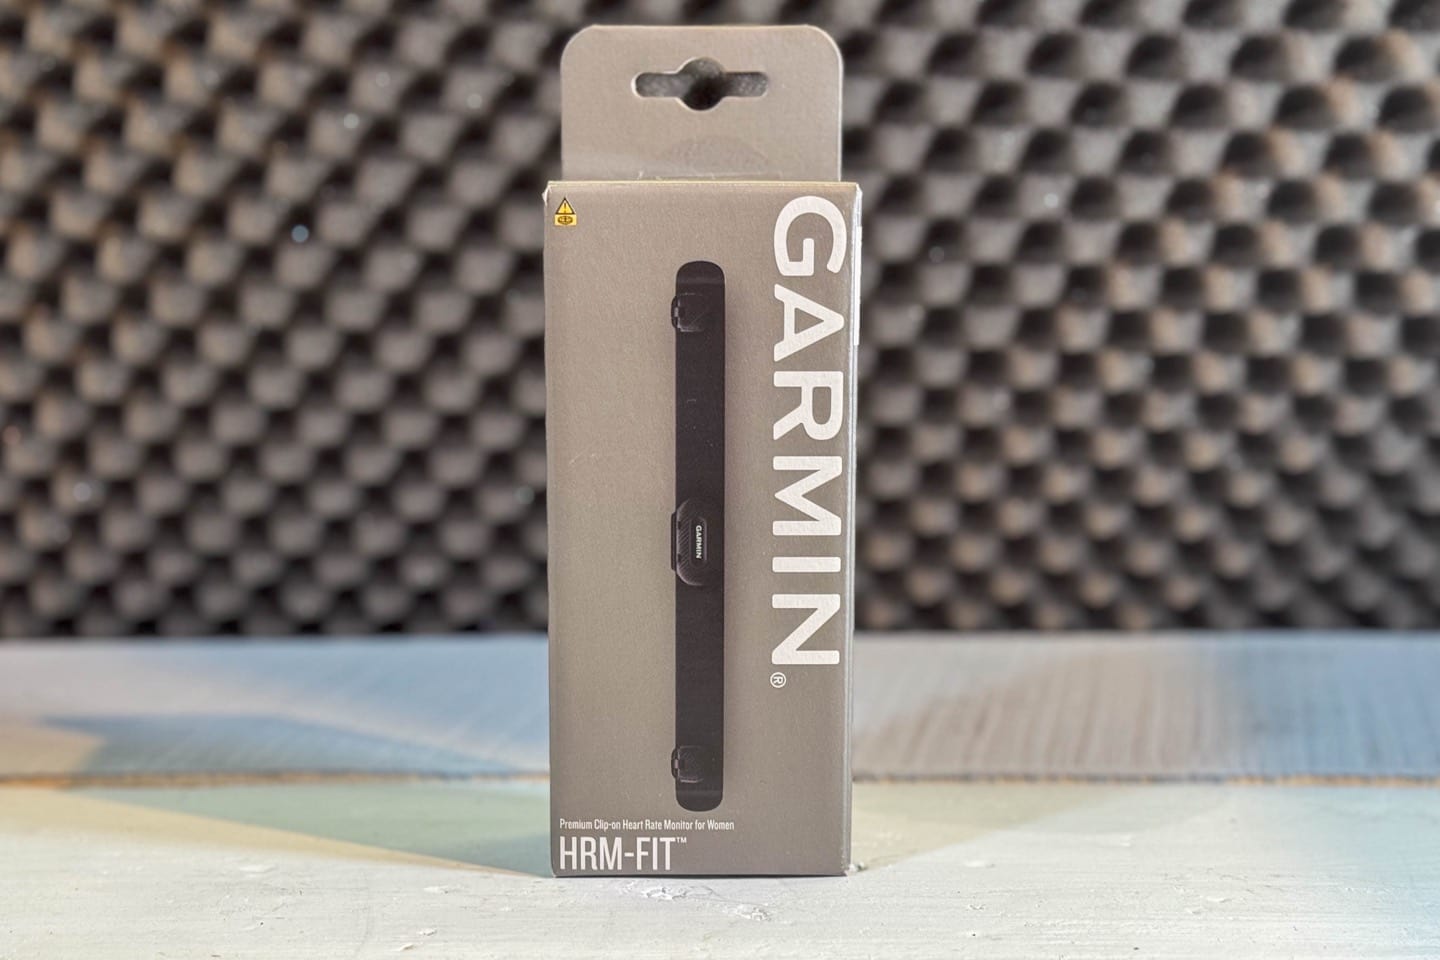 Garmin HRM-Fit review: a heart rate monitor designed for women